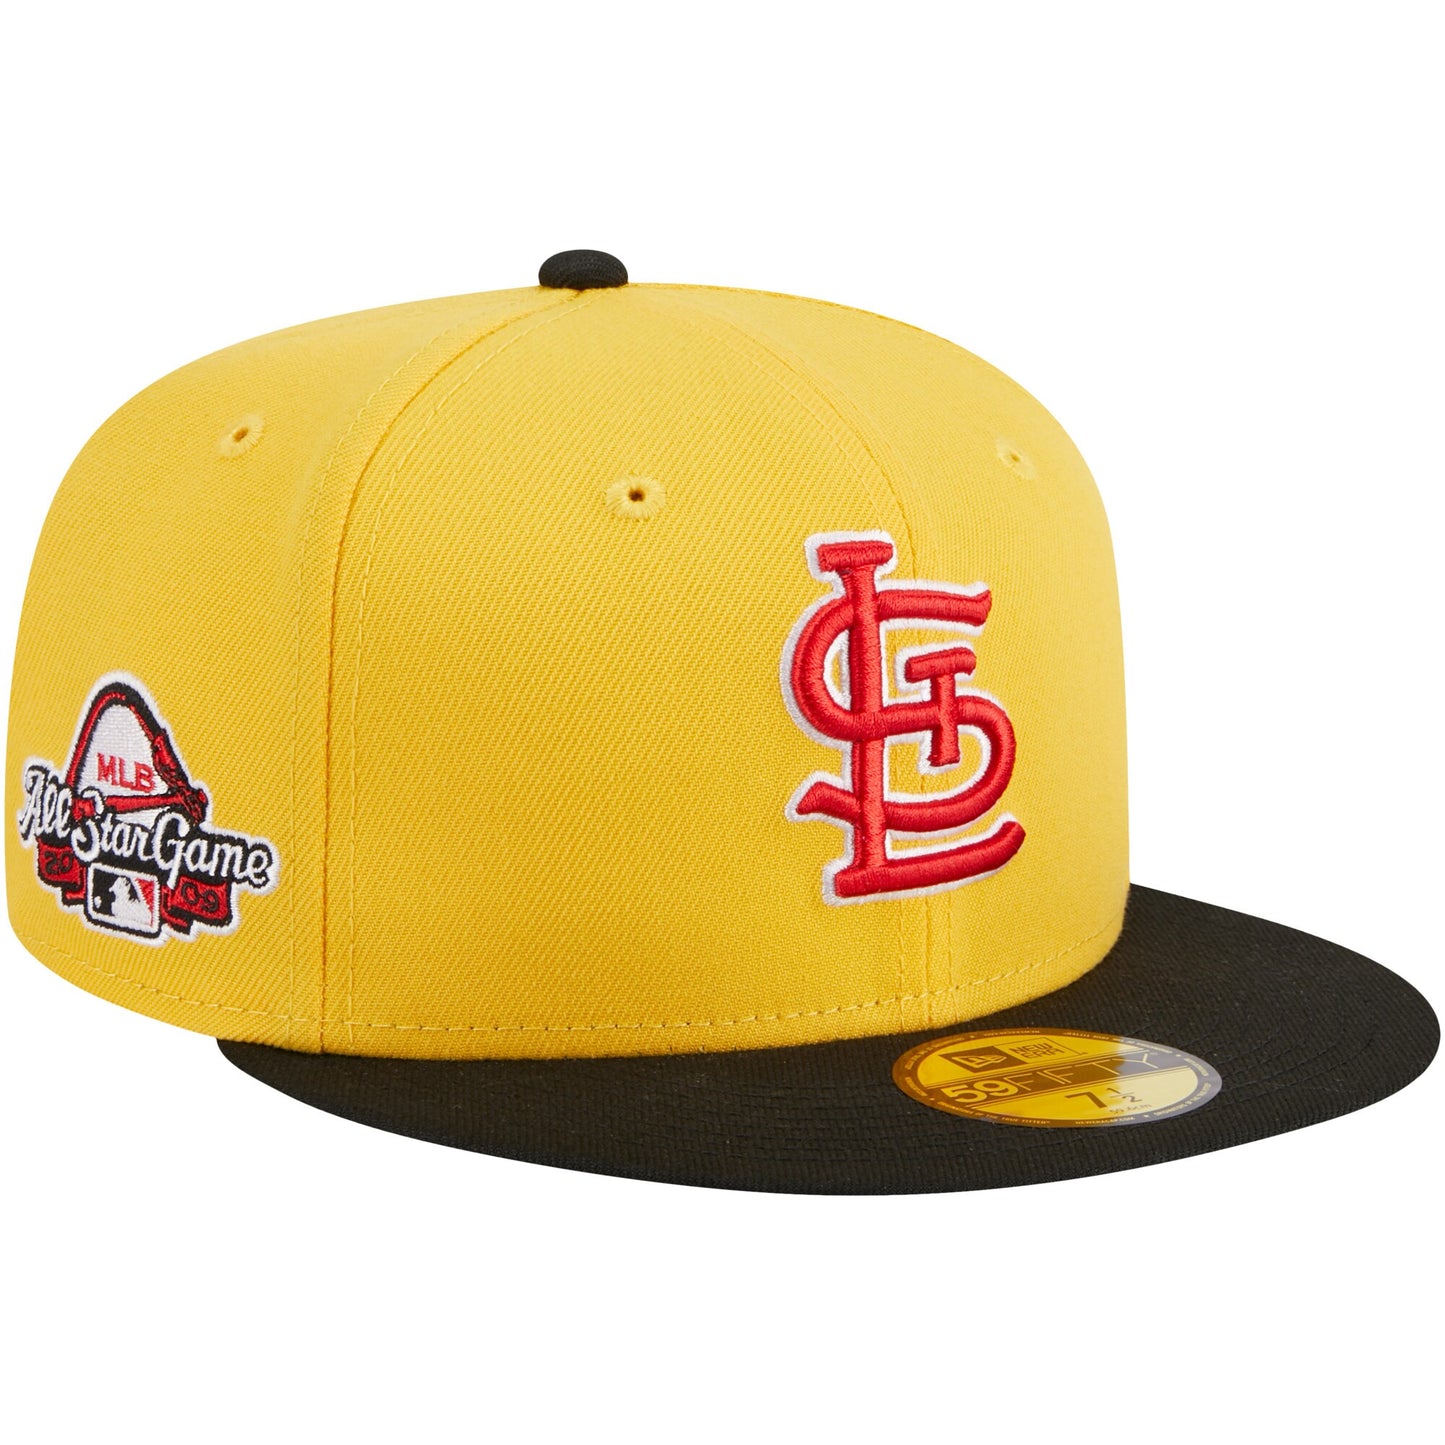 St. Louis Cardinals New Era Grilled 59FIFTY Fitted Hat - Yellow/Black